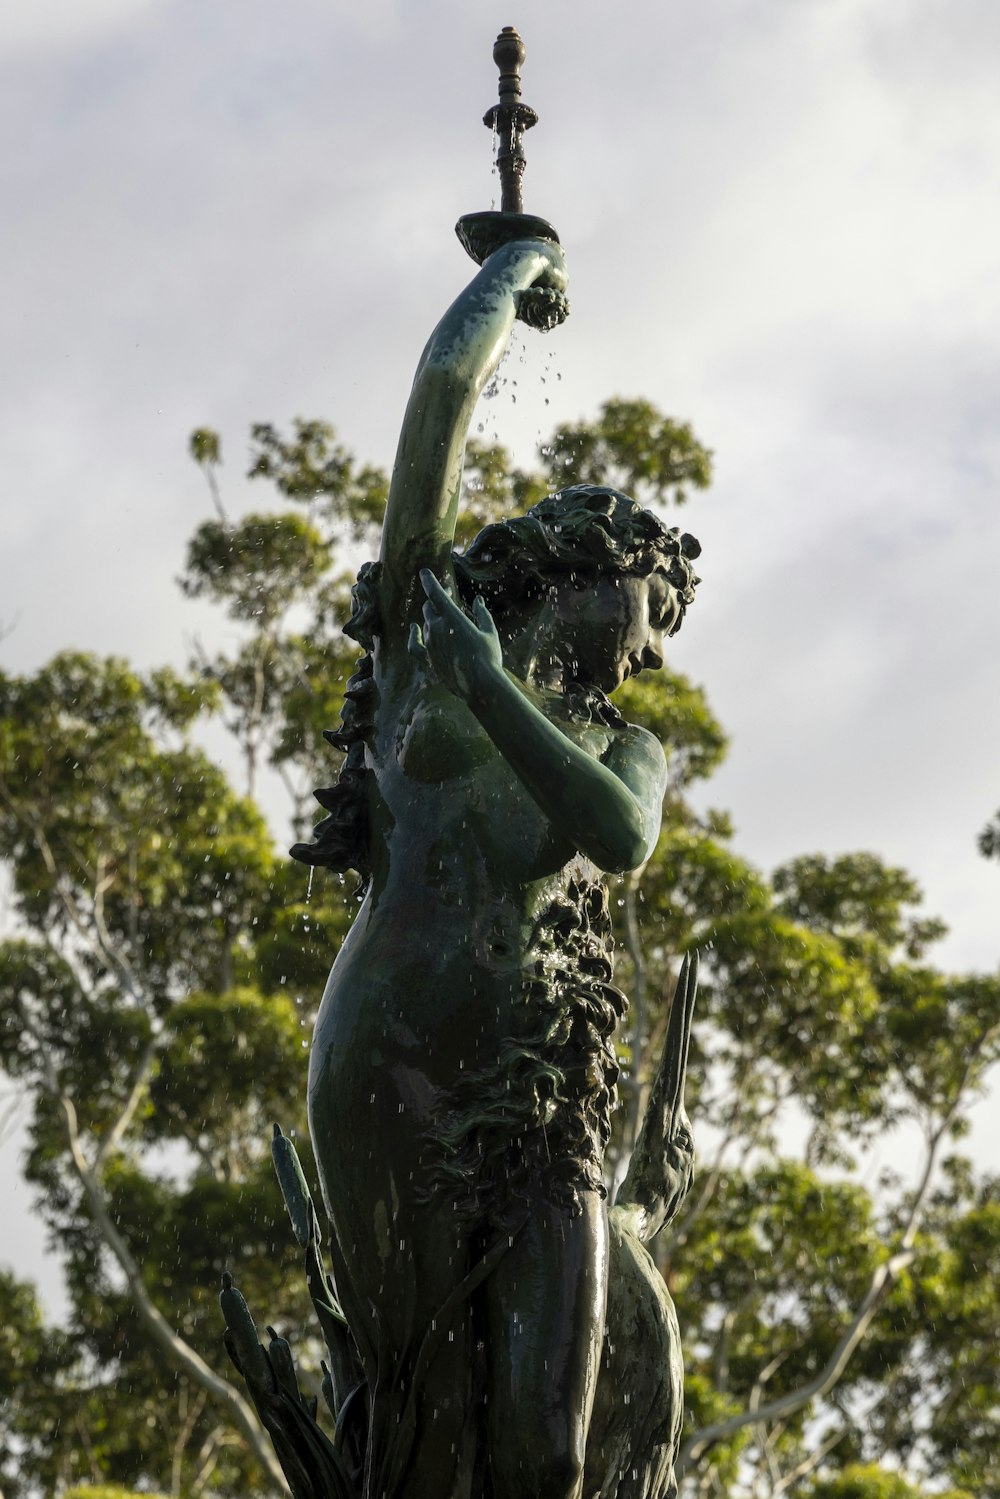 a statue of a woman holding a water spout